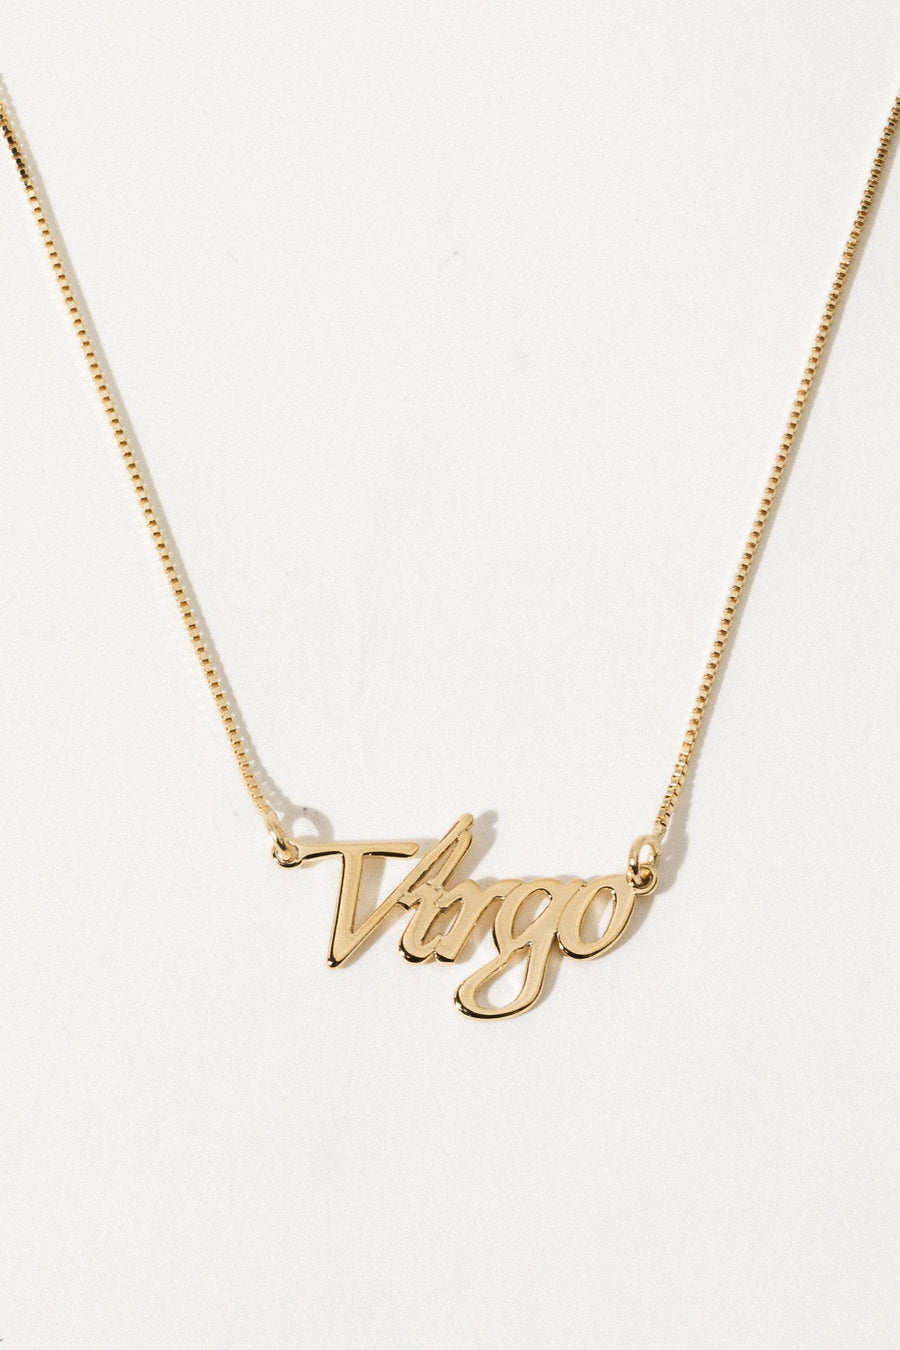 The Goth Booth Jewelry Virgo / Gold / 16 inches Signature Zodiac Necklace